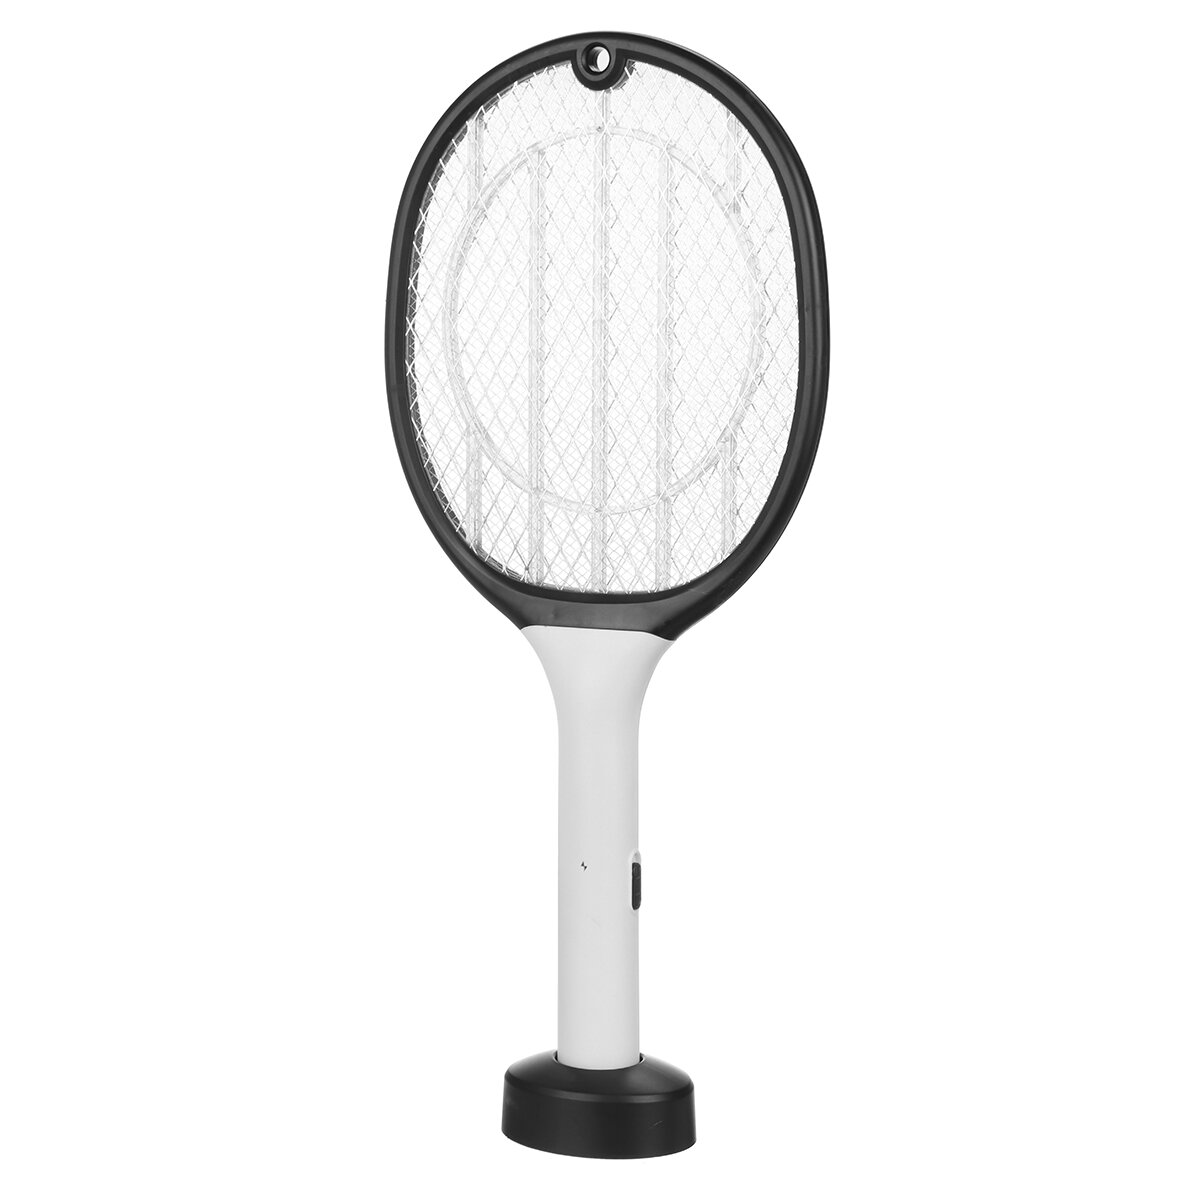 2-in-1 Electric Mosquito Swatter Killer Lamp USB Rechargeable Handheld Killing Mosquito Insect Fly Zapper